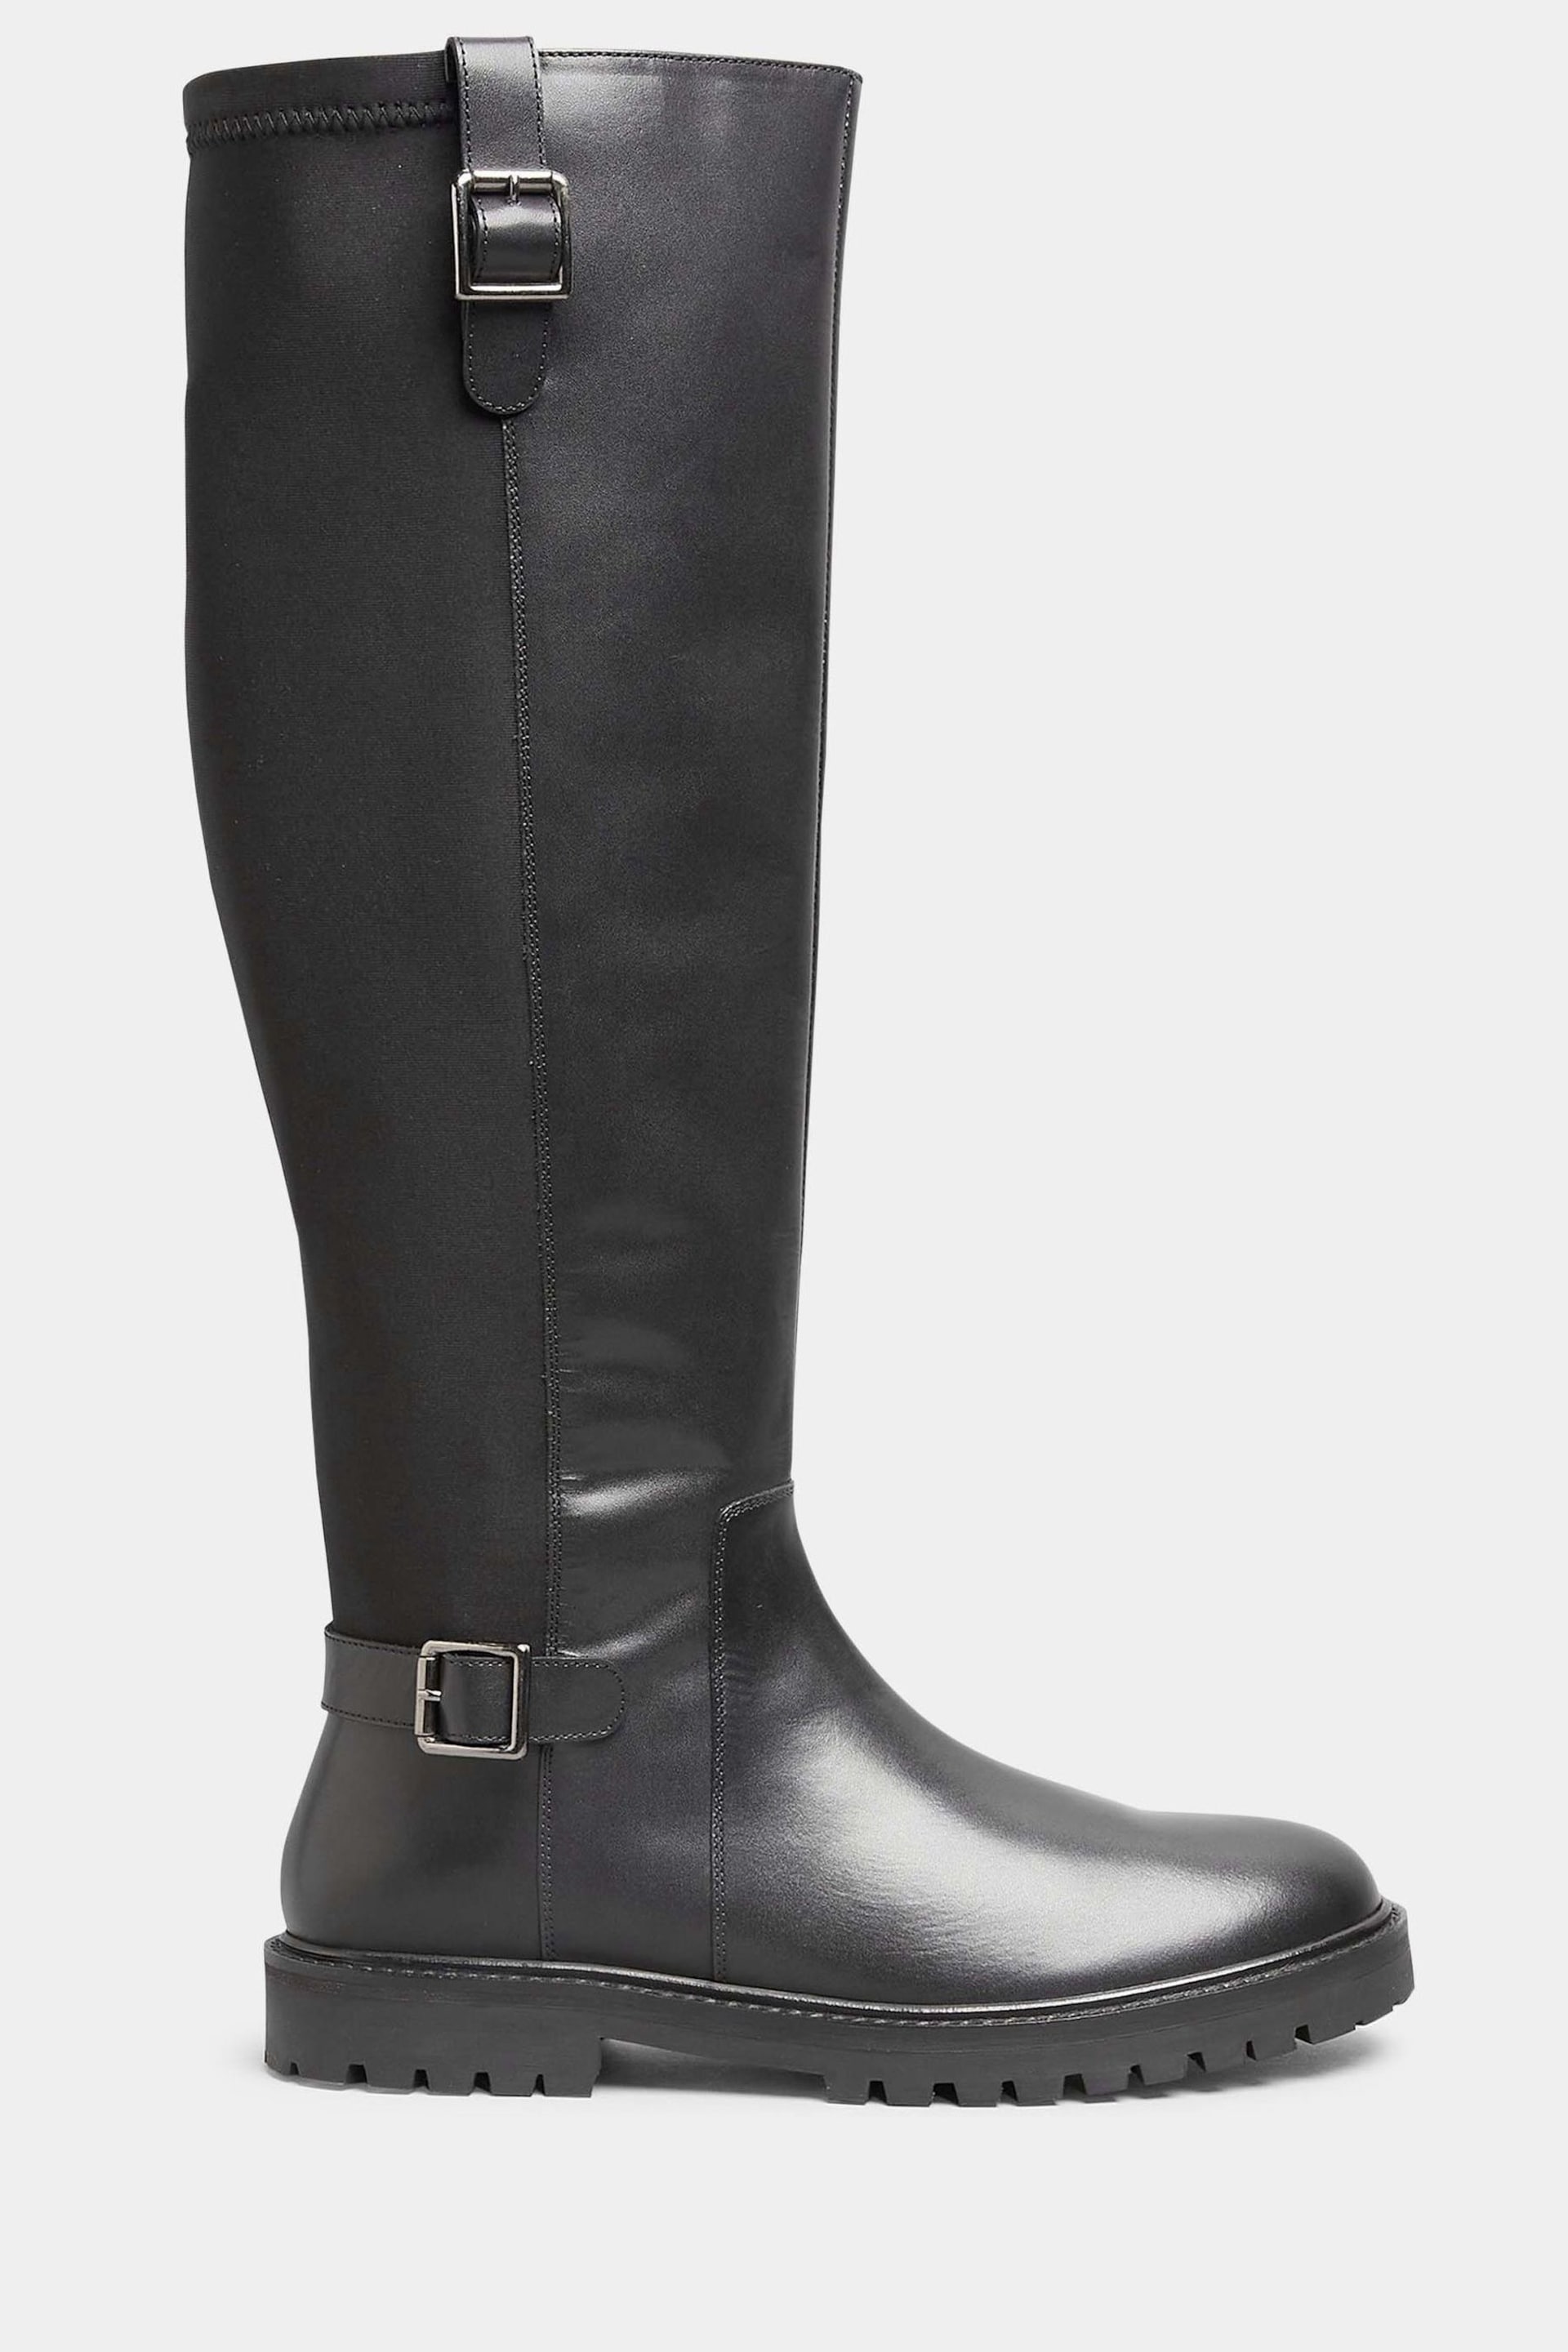 Long Tall Sally Black Leather Cleated Calf Boots - Image 1 of 5